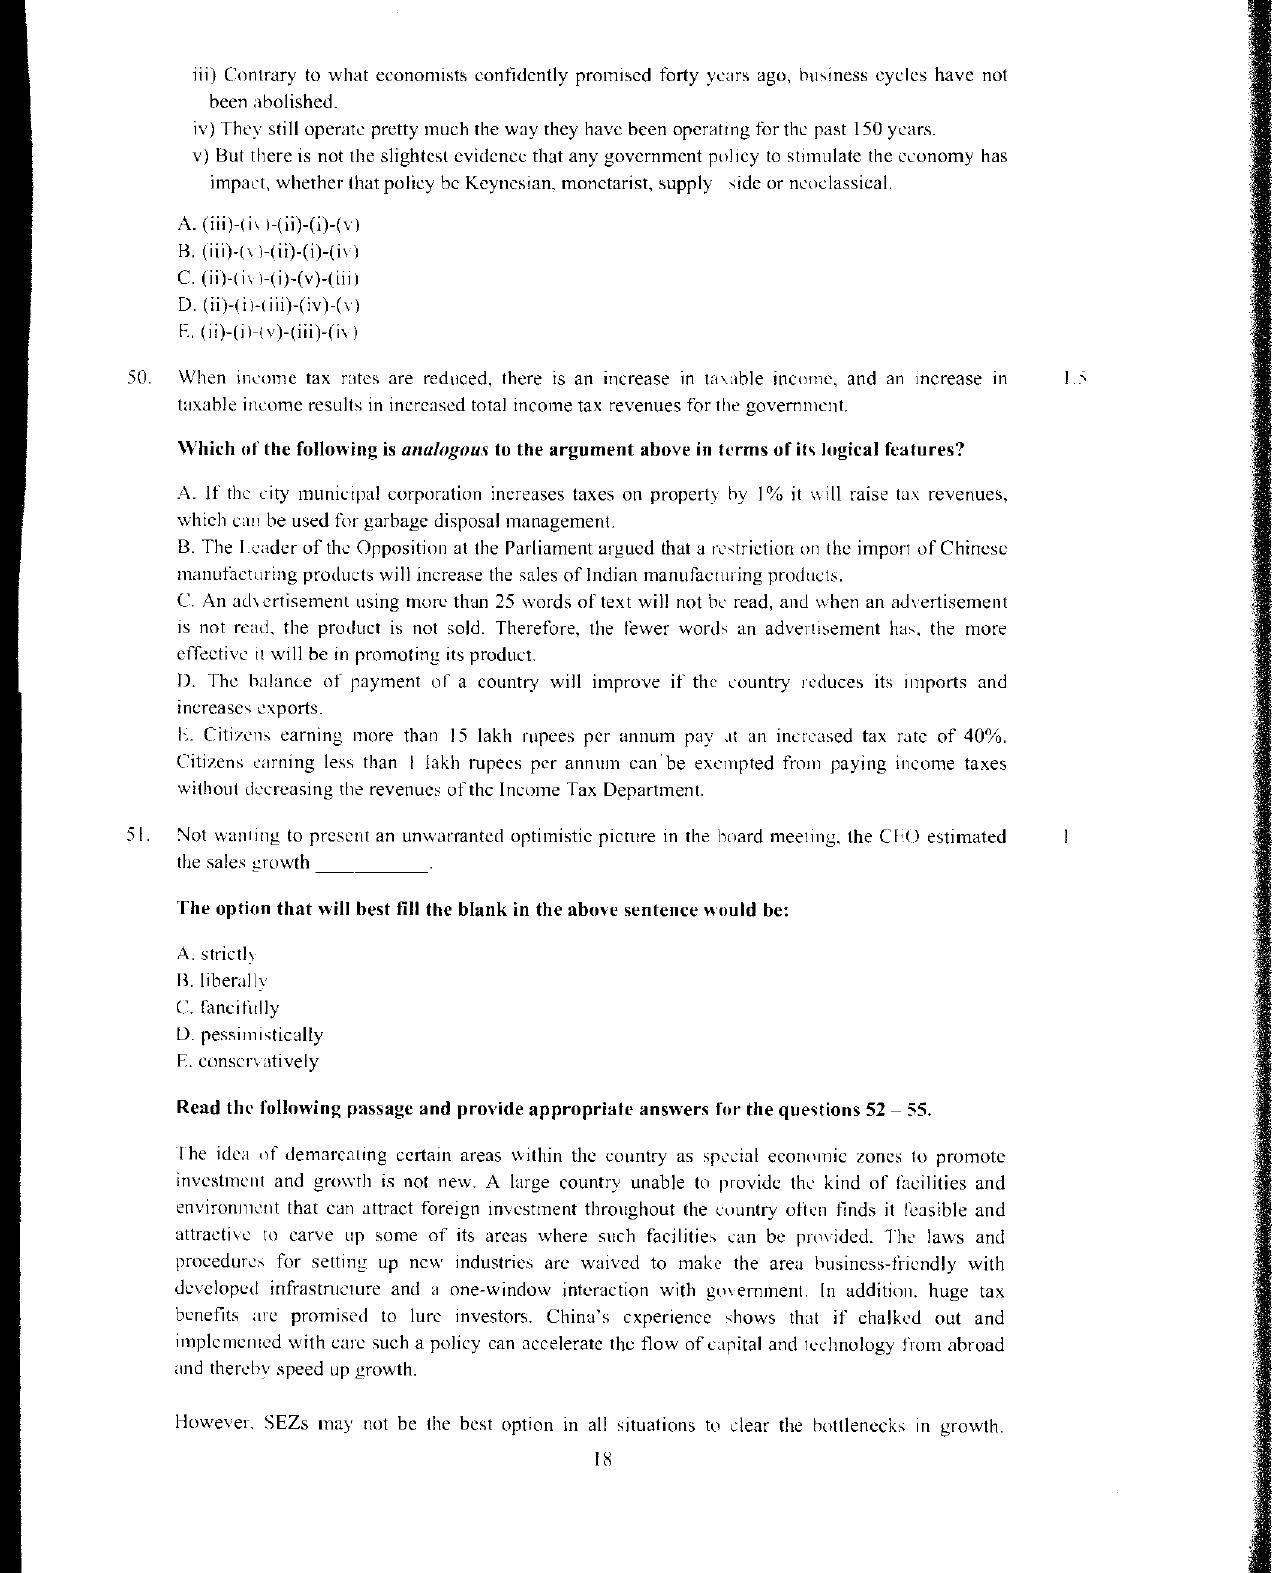 XAT 2012 Question Papers - Page 19